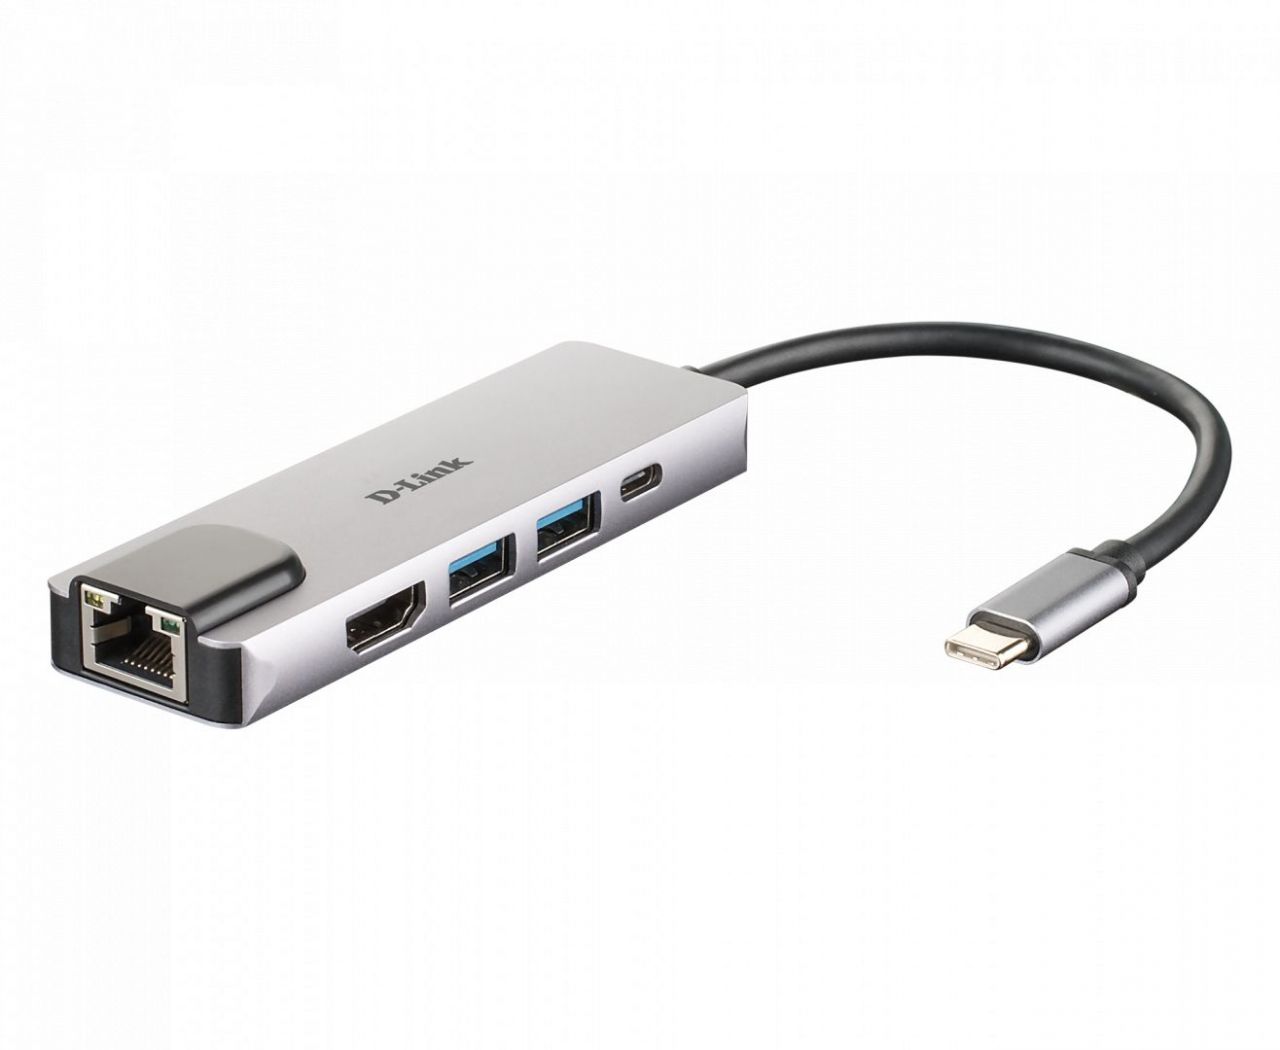 D-Link DUB-M520 5-in-1 USB-C Hub with HDMI/Ethernet and Power Delivery